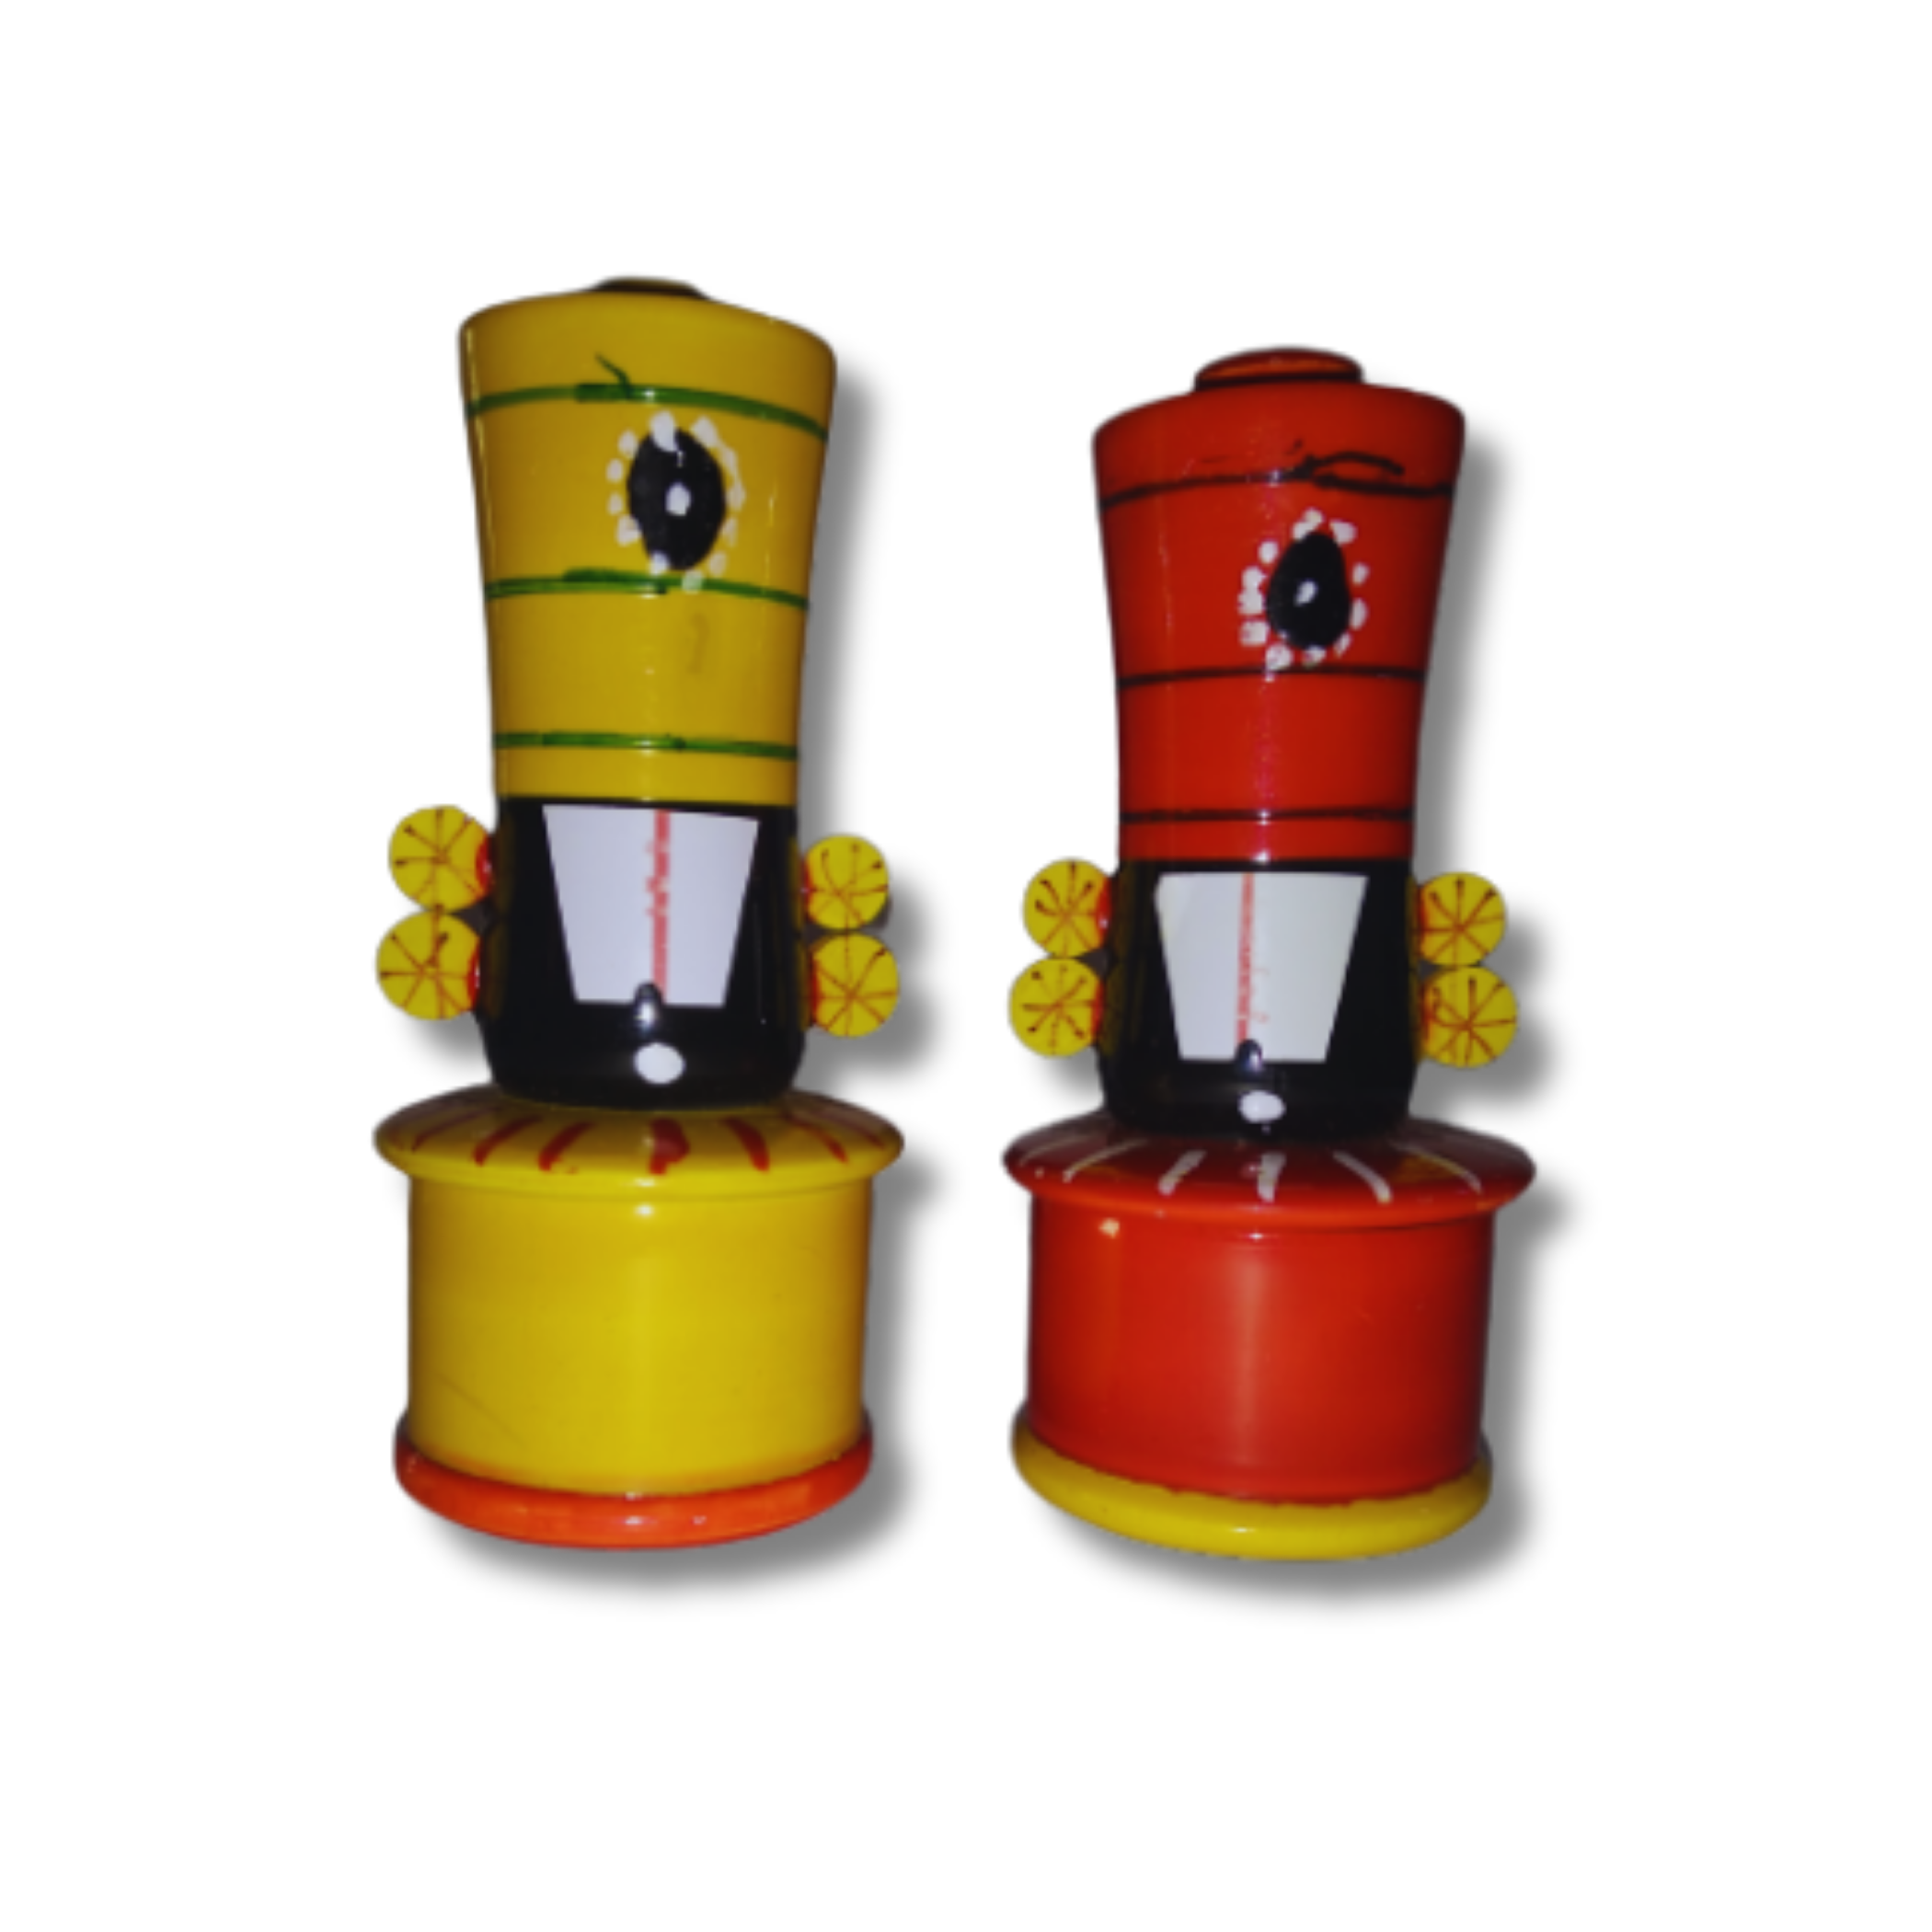 Authentic Etikoppaka Toys: Handcrafted Wooden Masterpieces for Play and Decor - Balaji - Small